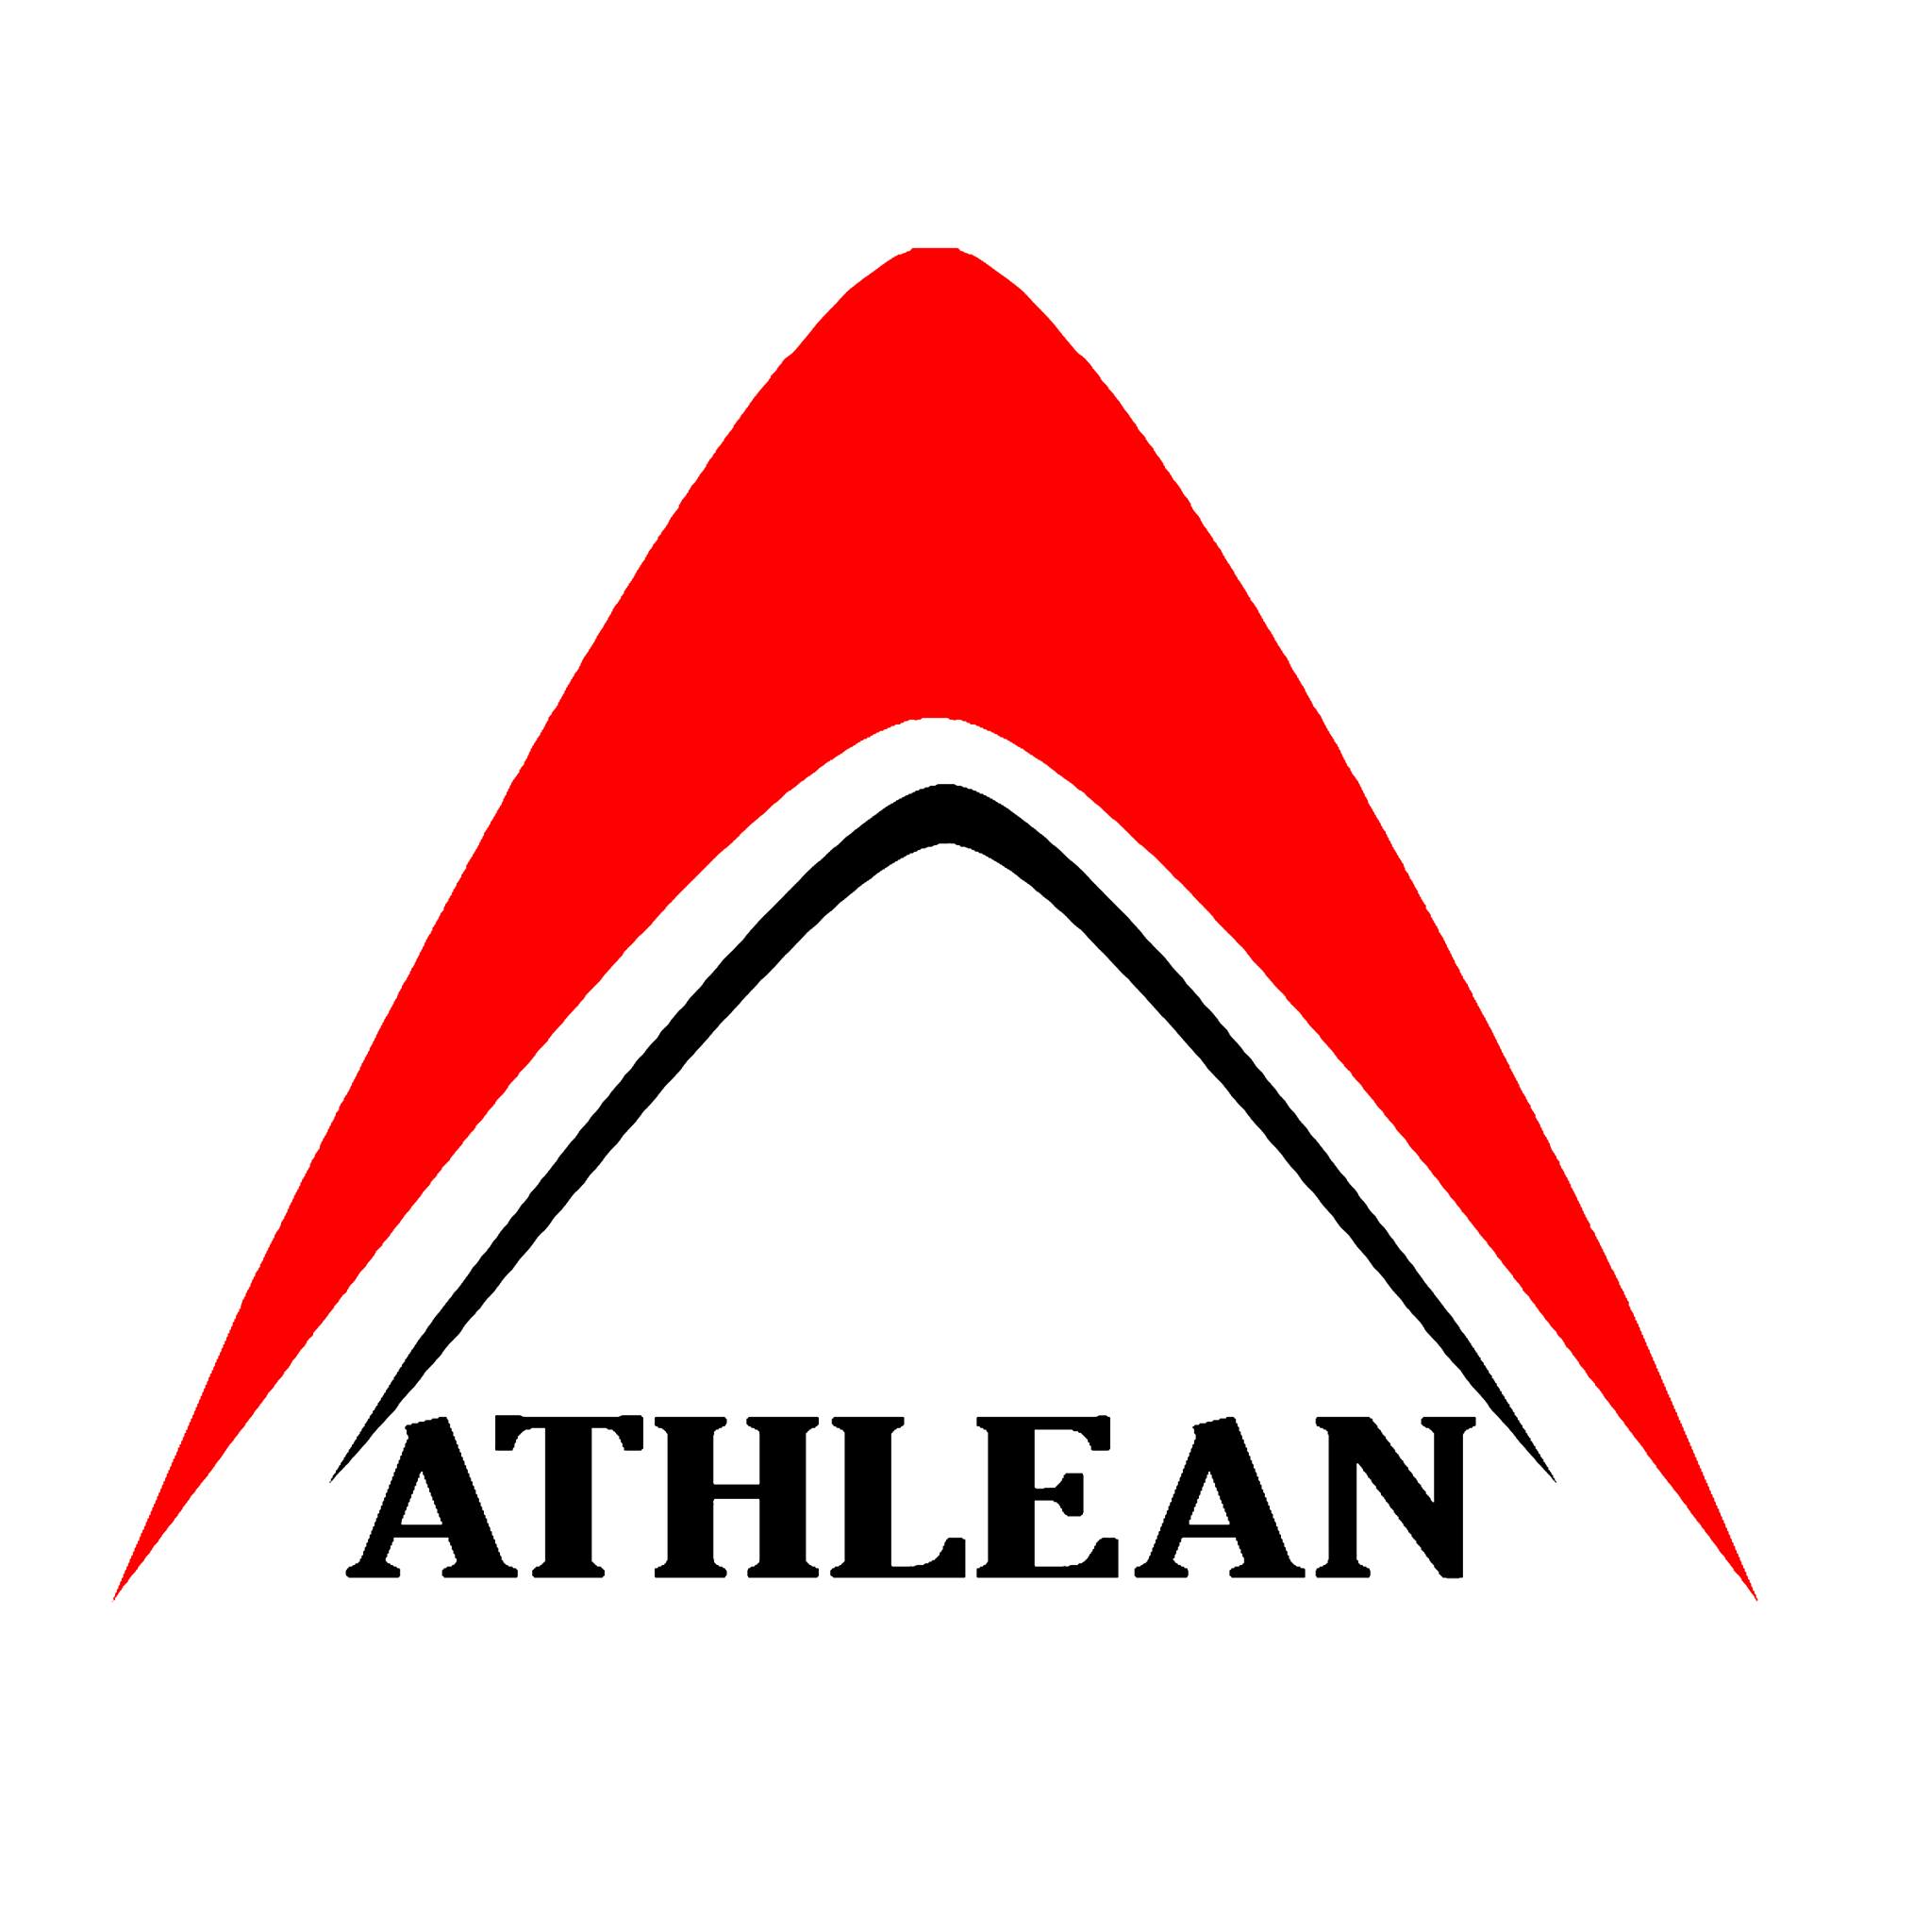 Athlean Fitness Club|Gym and Fitness Centre|Active Life